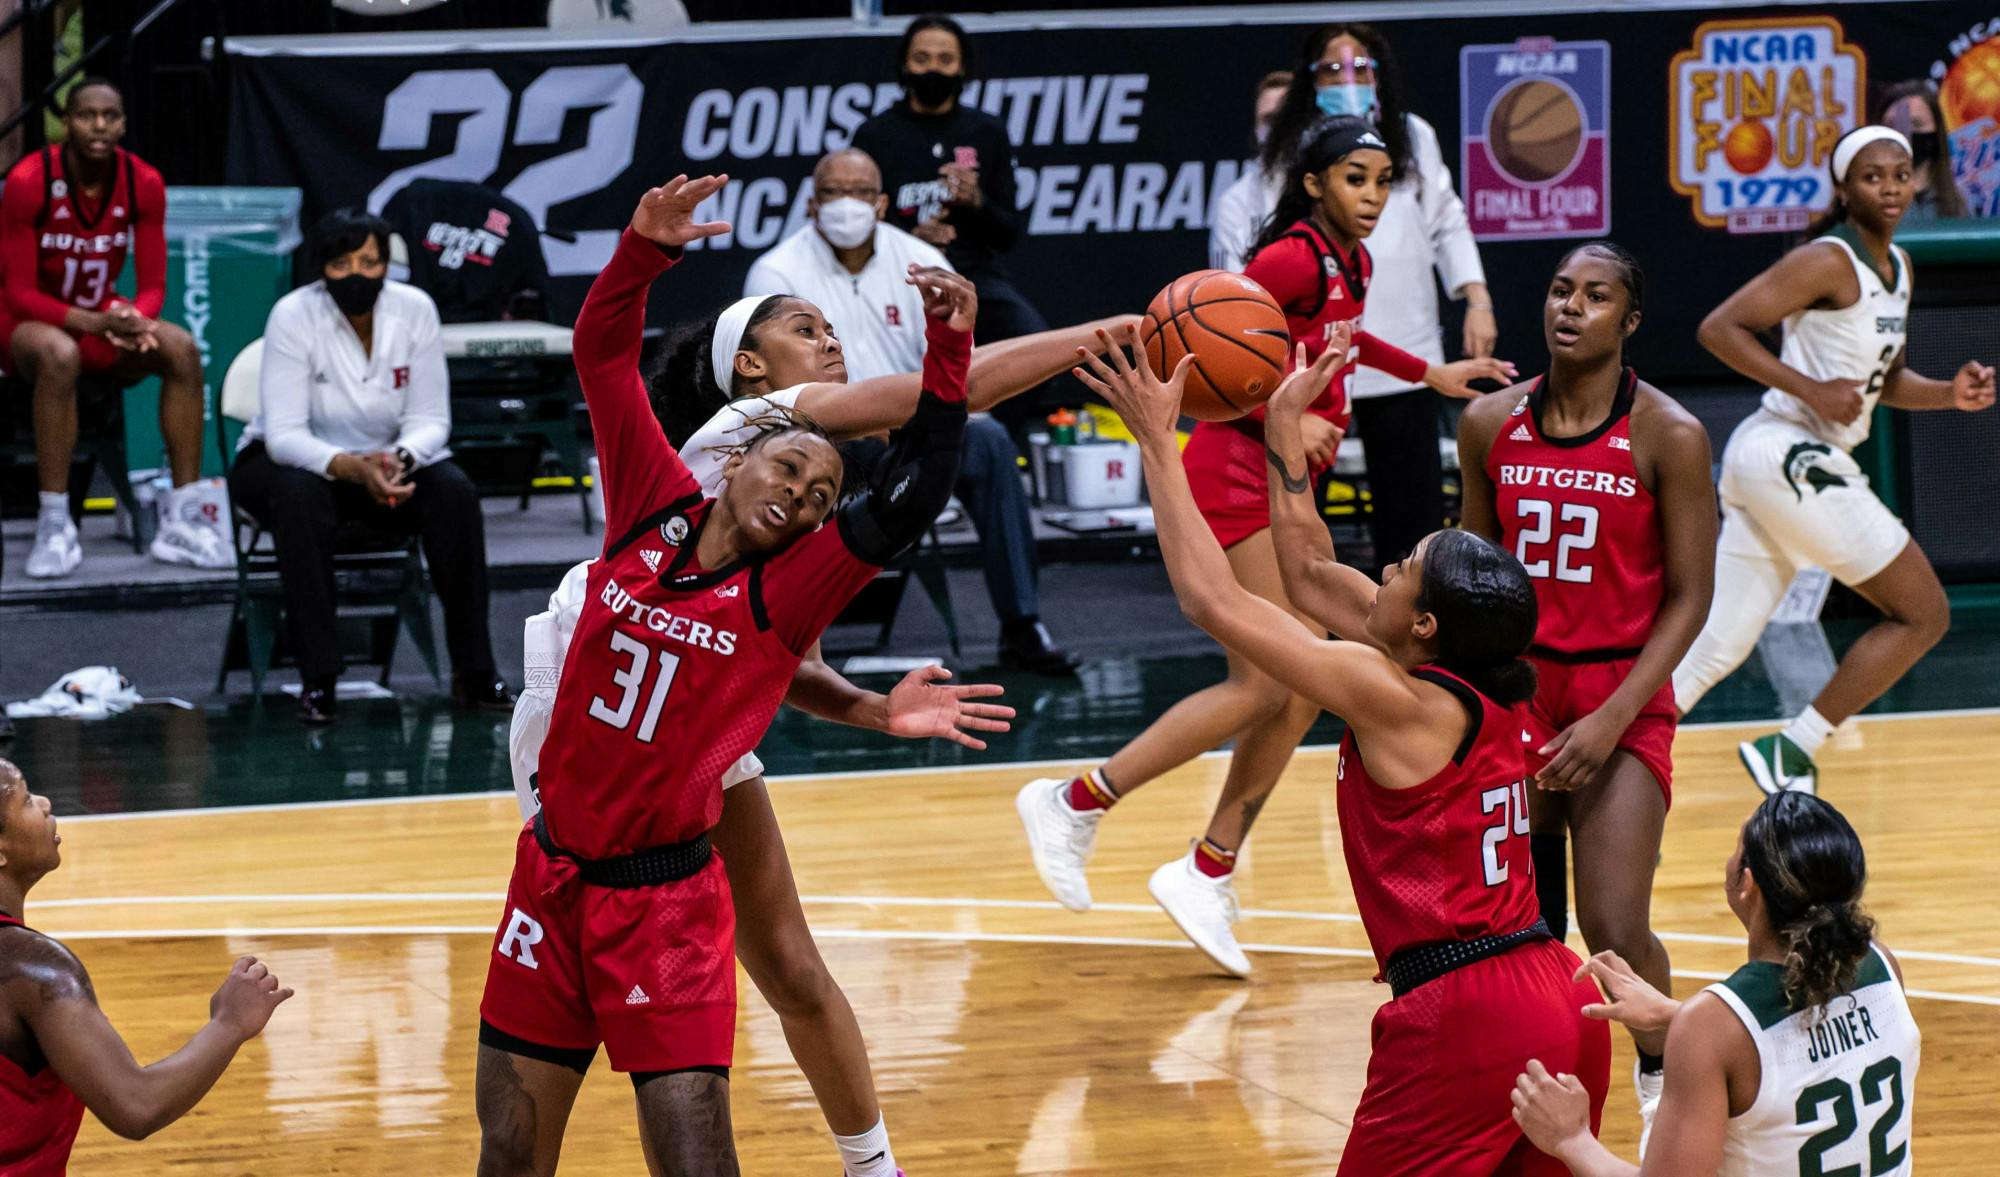 Michigan State versus Rutgers was a violent one, with Crooms losing a tooth in the first half and Joiner limping off to the bench in the second half. The Scarlet Knights made a comeback in the second half to triumph over the Spartans, 63-53, on Feb. 24, 2021.